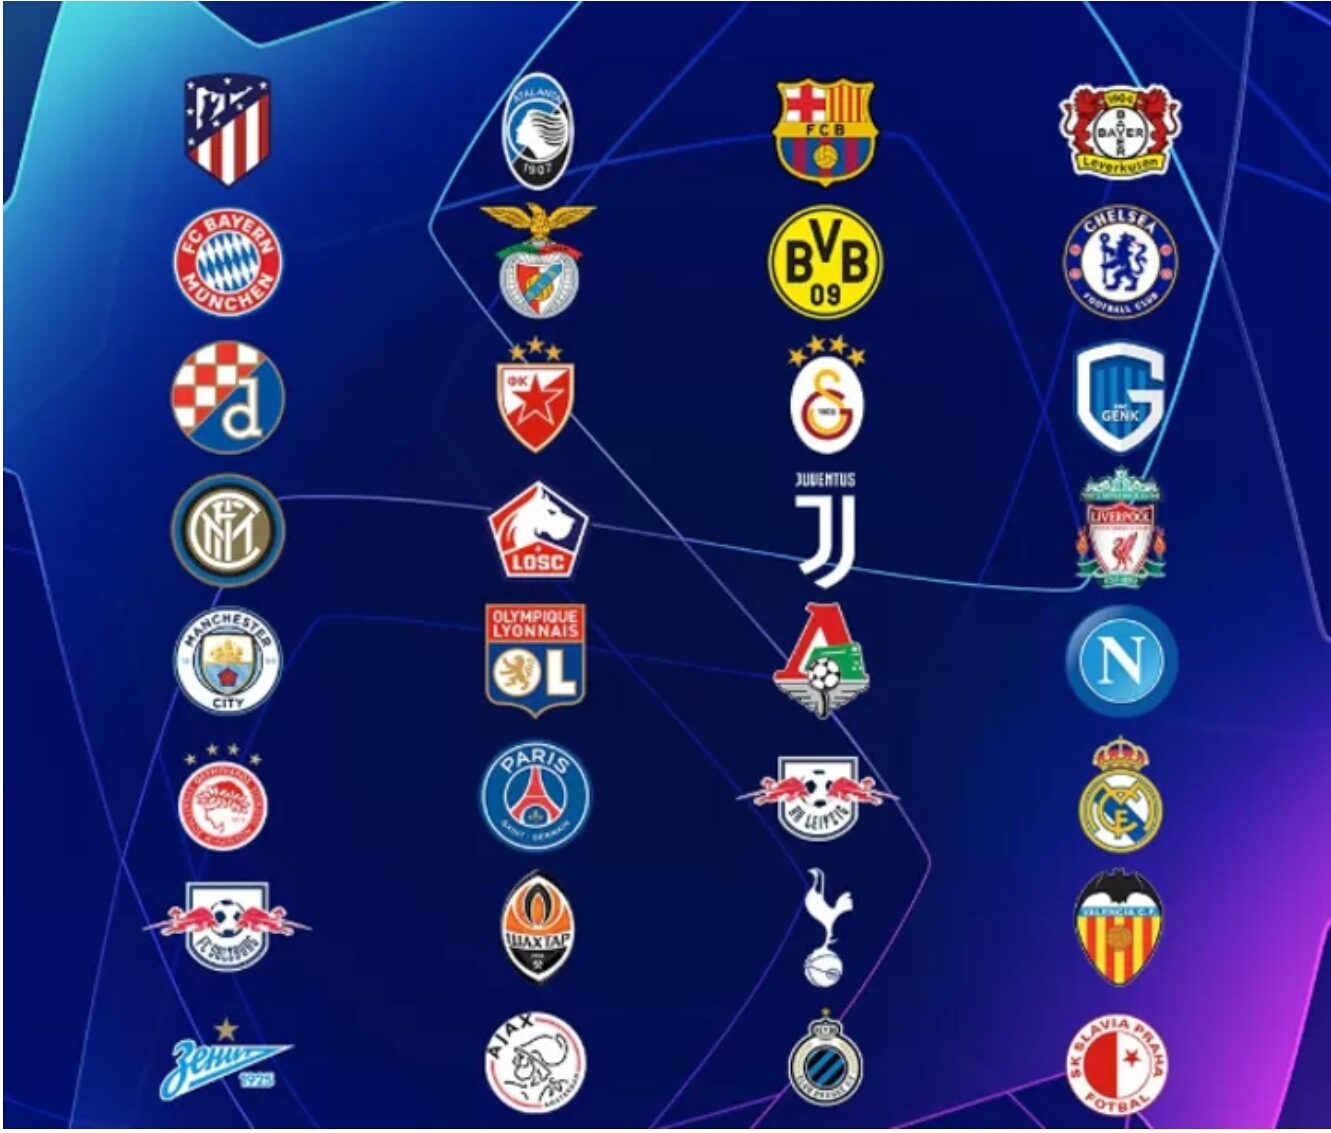 2019/20 UCL draw to take place today after confirmation of 32 clubs